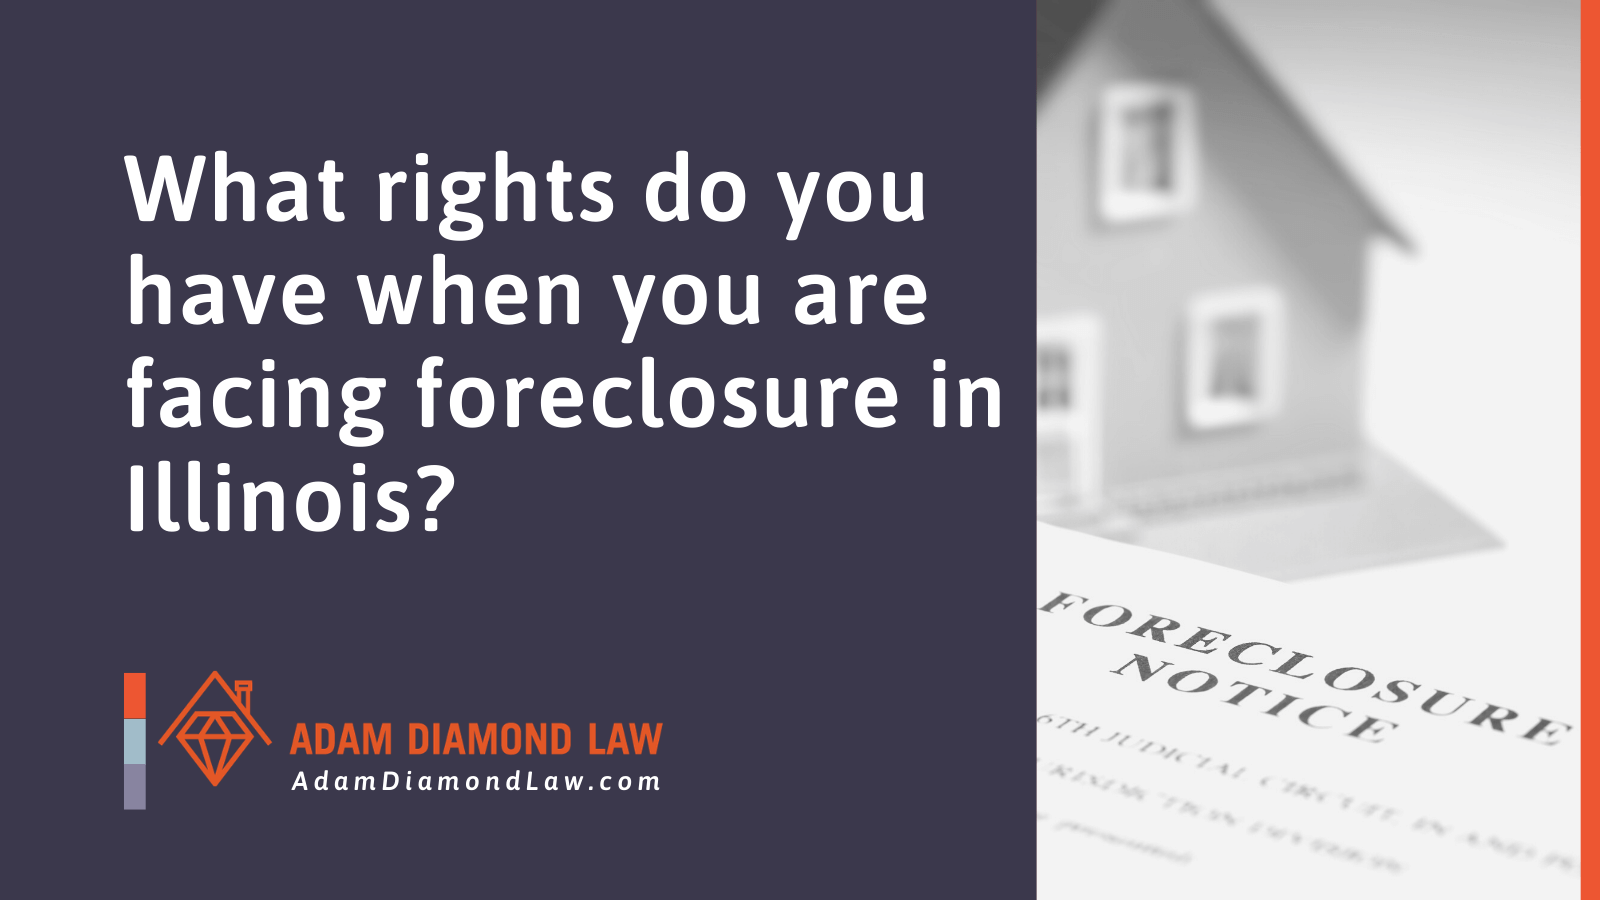 What rights do you have when you are facing foreclosure in Illinois? - Adam Diamond Law | McHenry, IL Residential Real Estate Lawyer